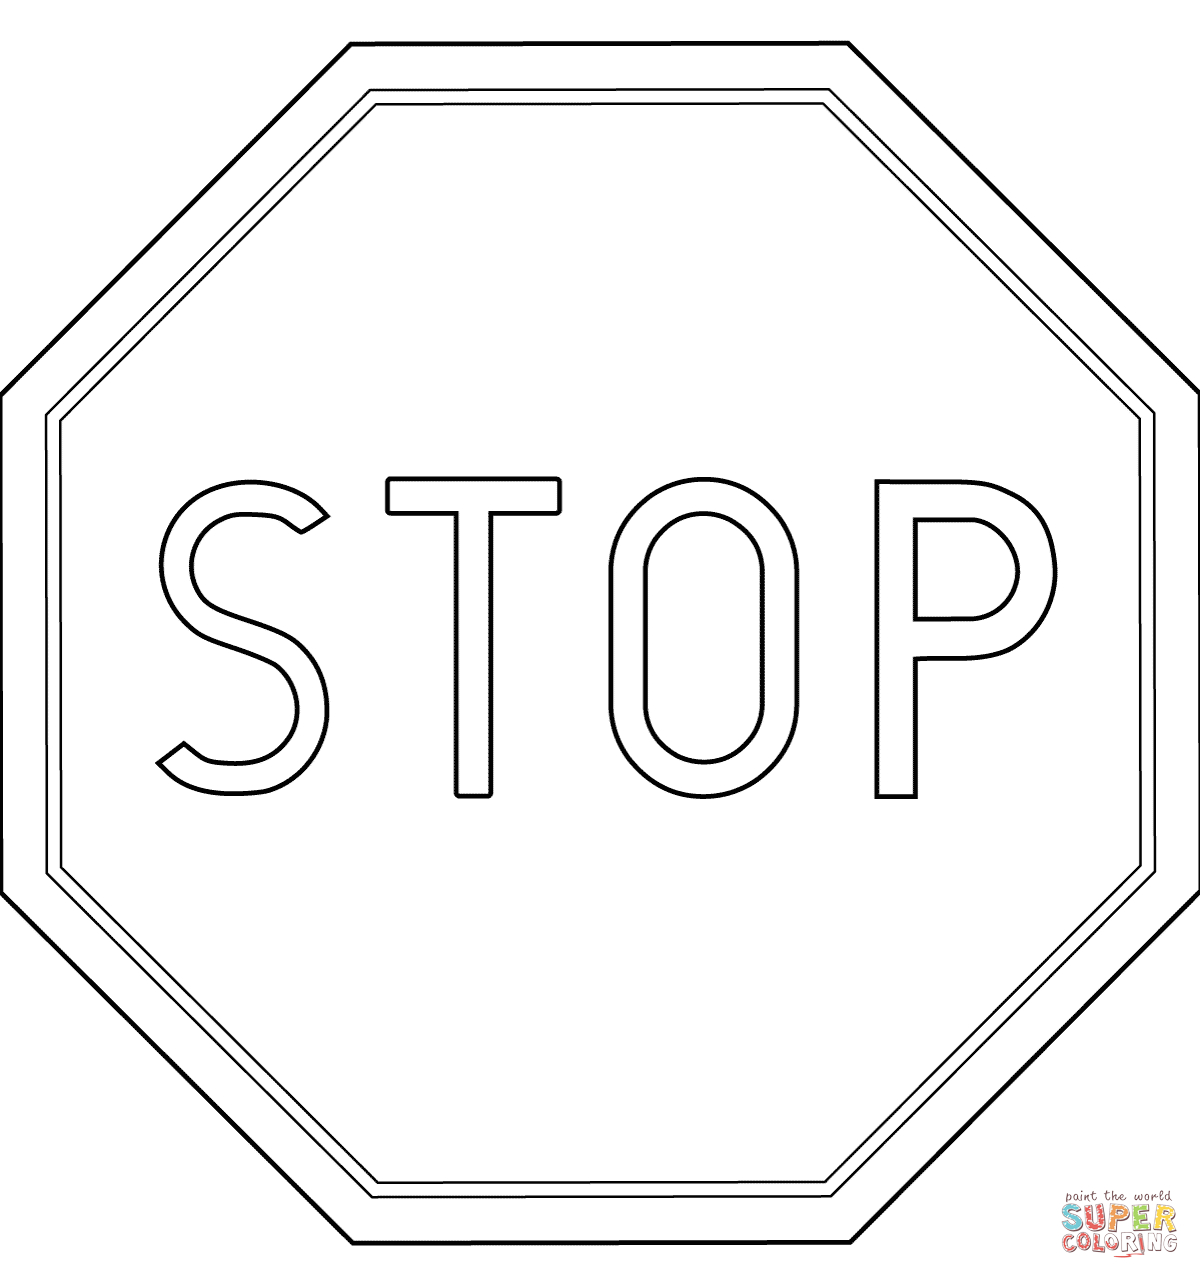 Poland Stop Road Sign B-20 Coloring Page | Free Printable Coloring Pages - Free Printable Stop Sign To Color